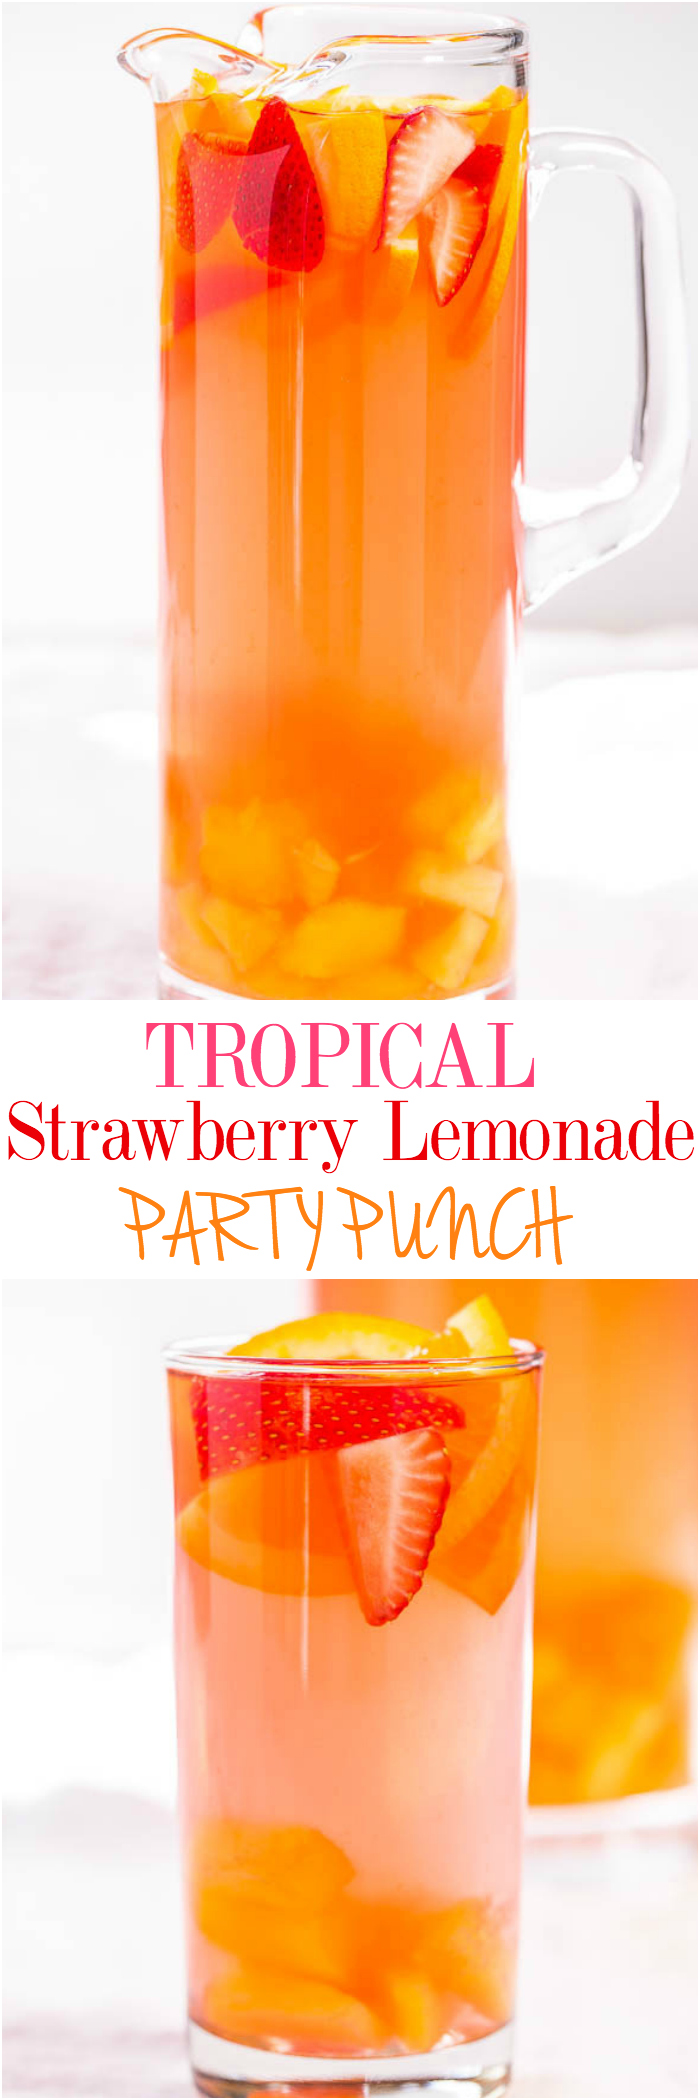 Tropical Strawberry Lemonade Party Punch - Sweet and citrusy with a tropical vibe! So fast and easy!! Punch and sangria all in one with loads of fruit!! (can be made virgin)